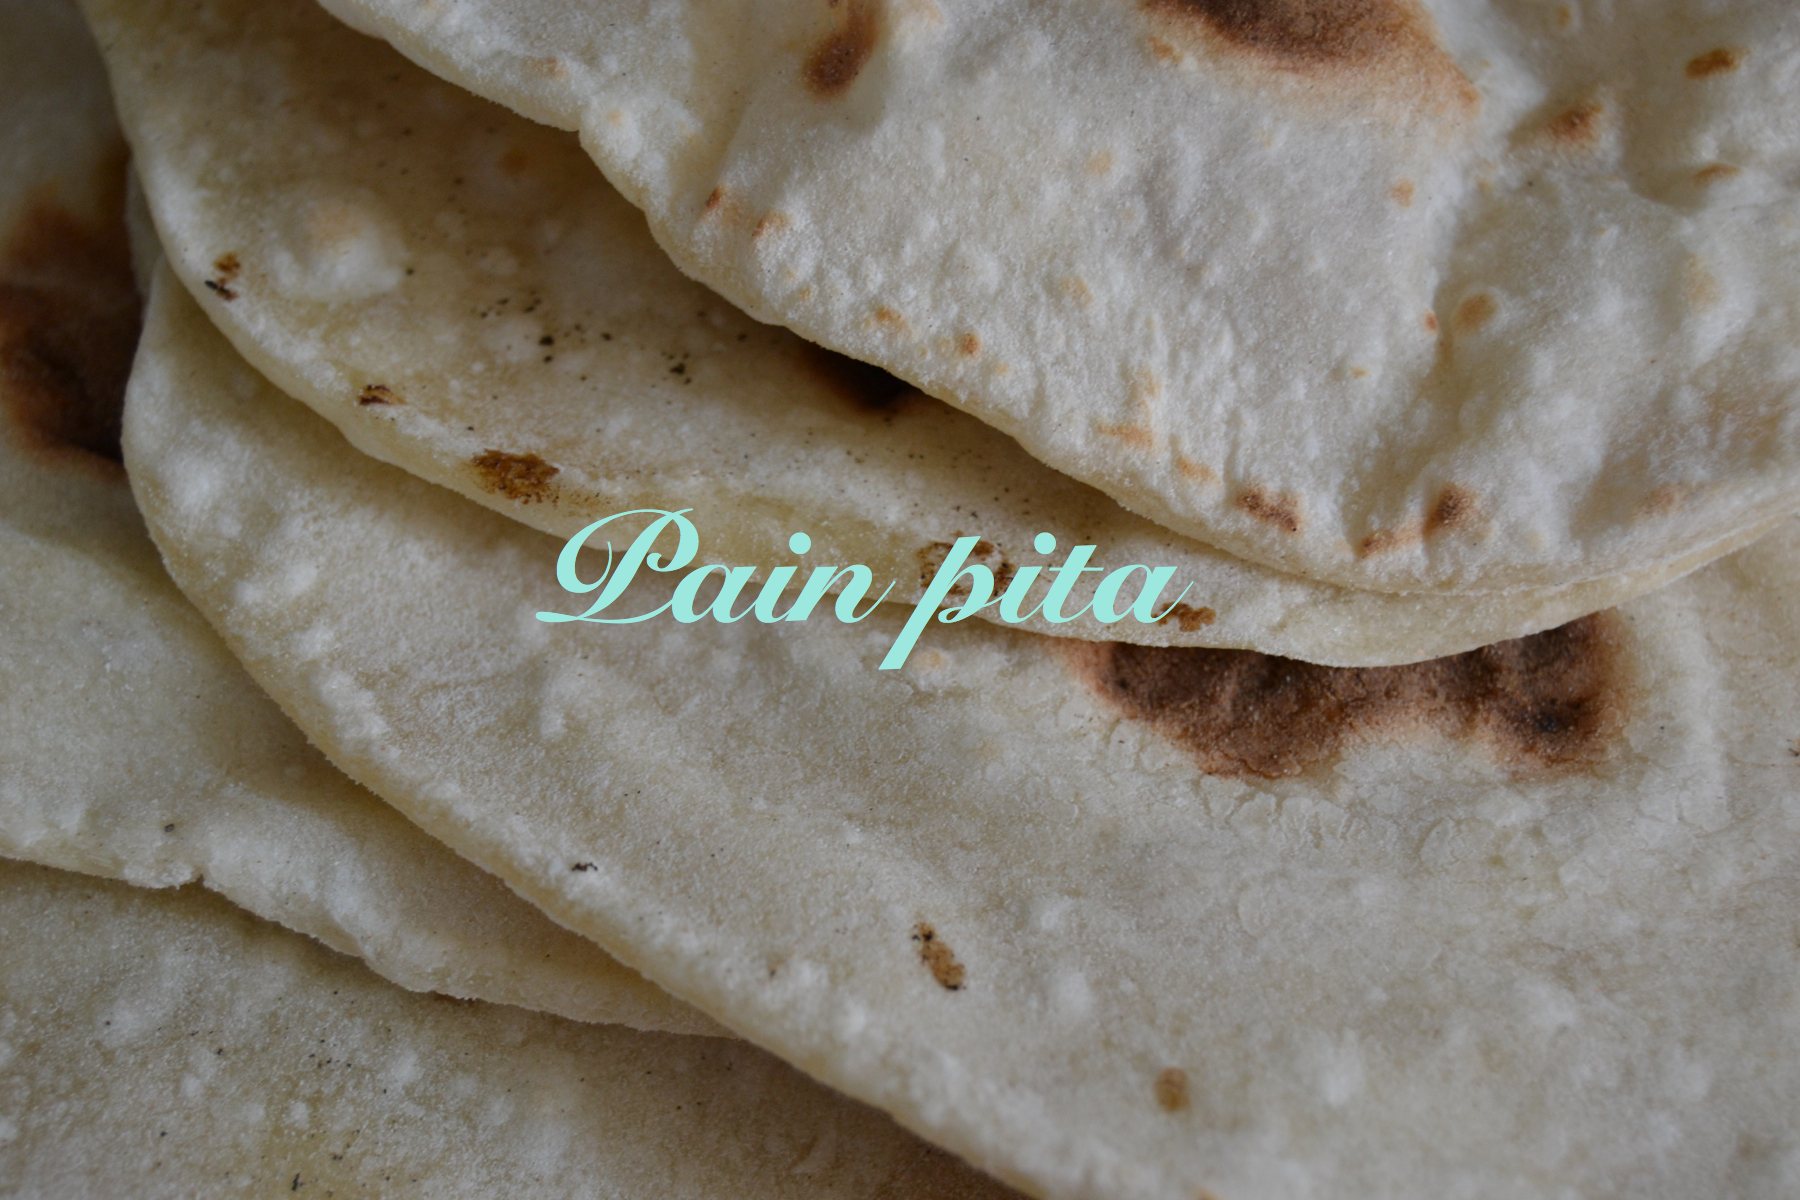 You are currently viewing Recette du pain pita